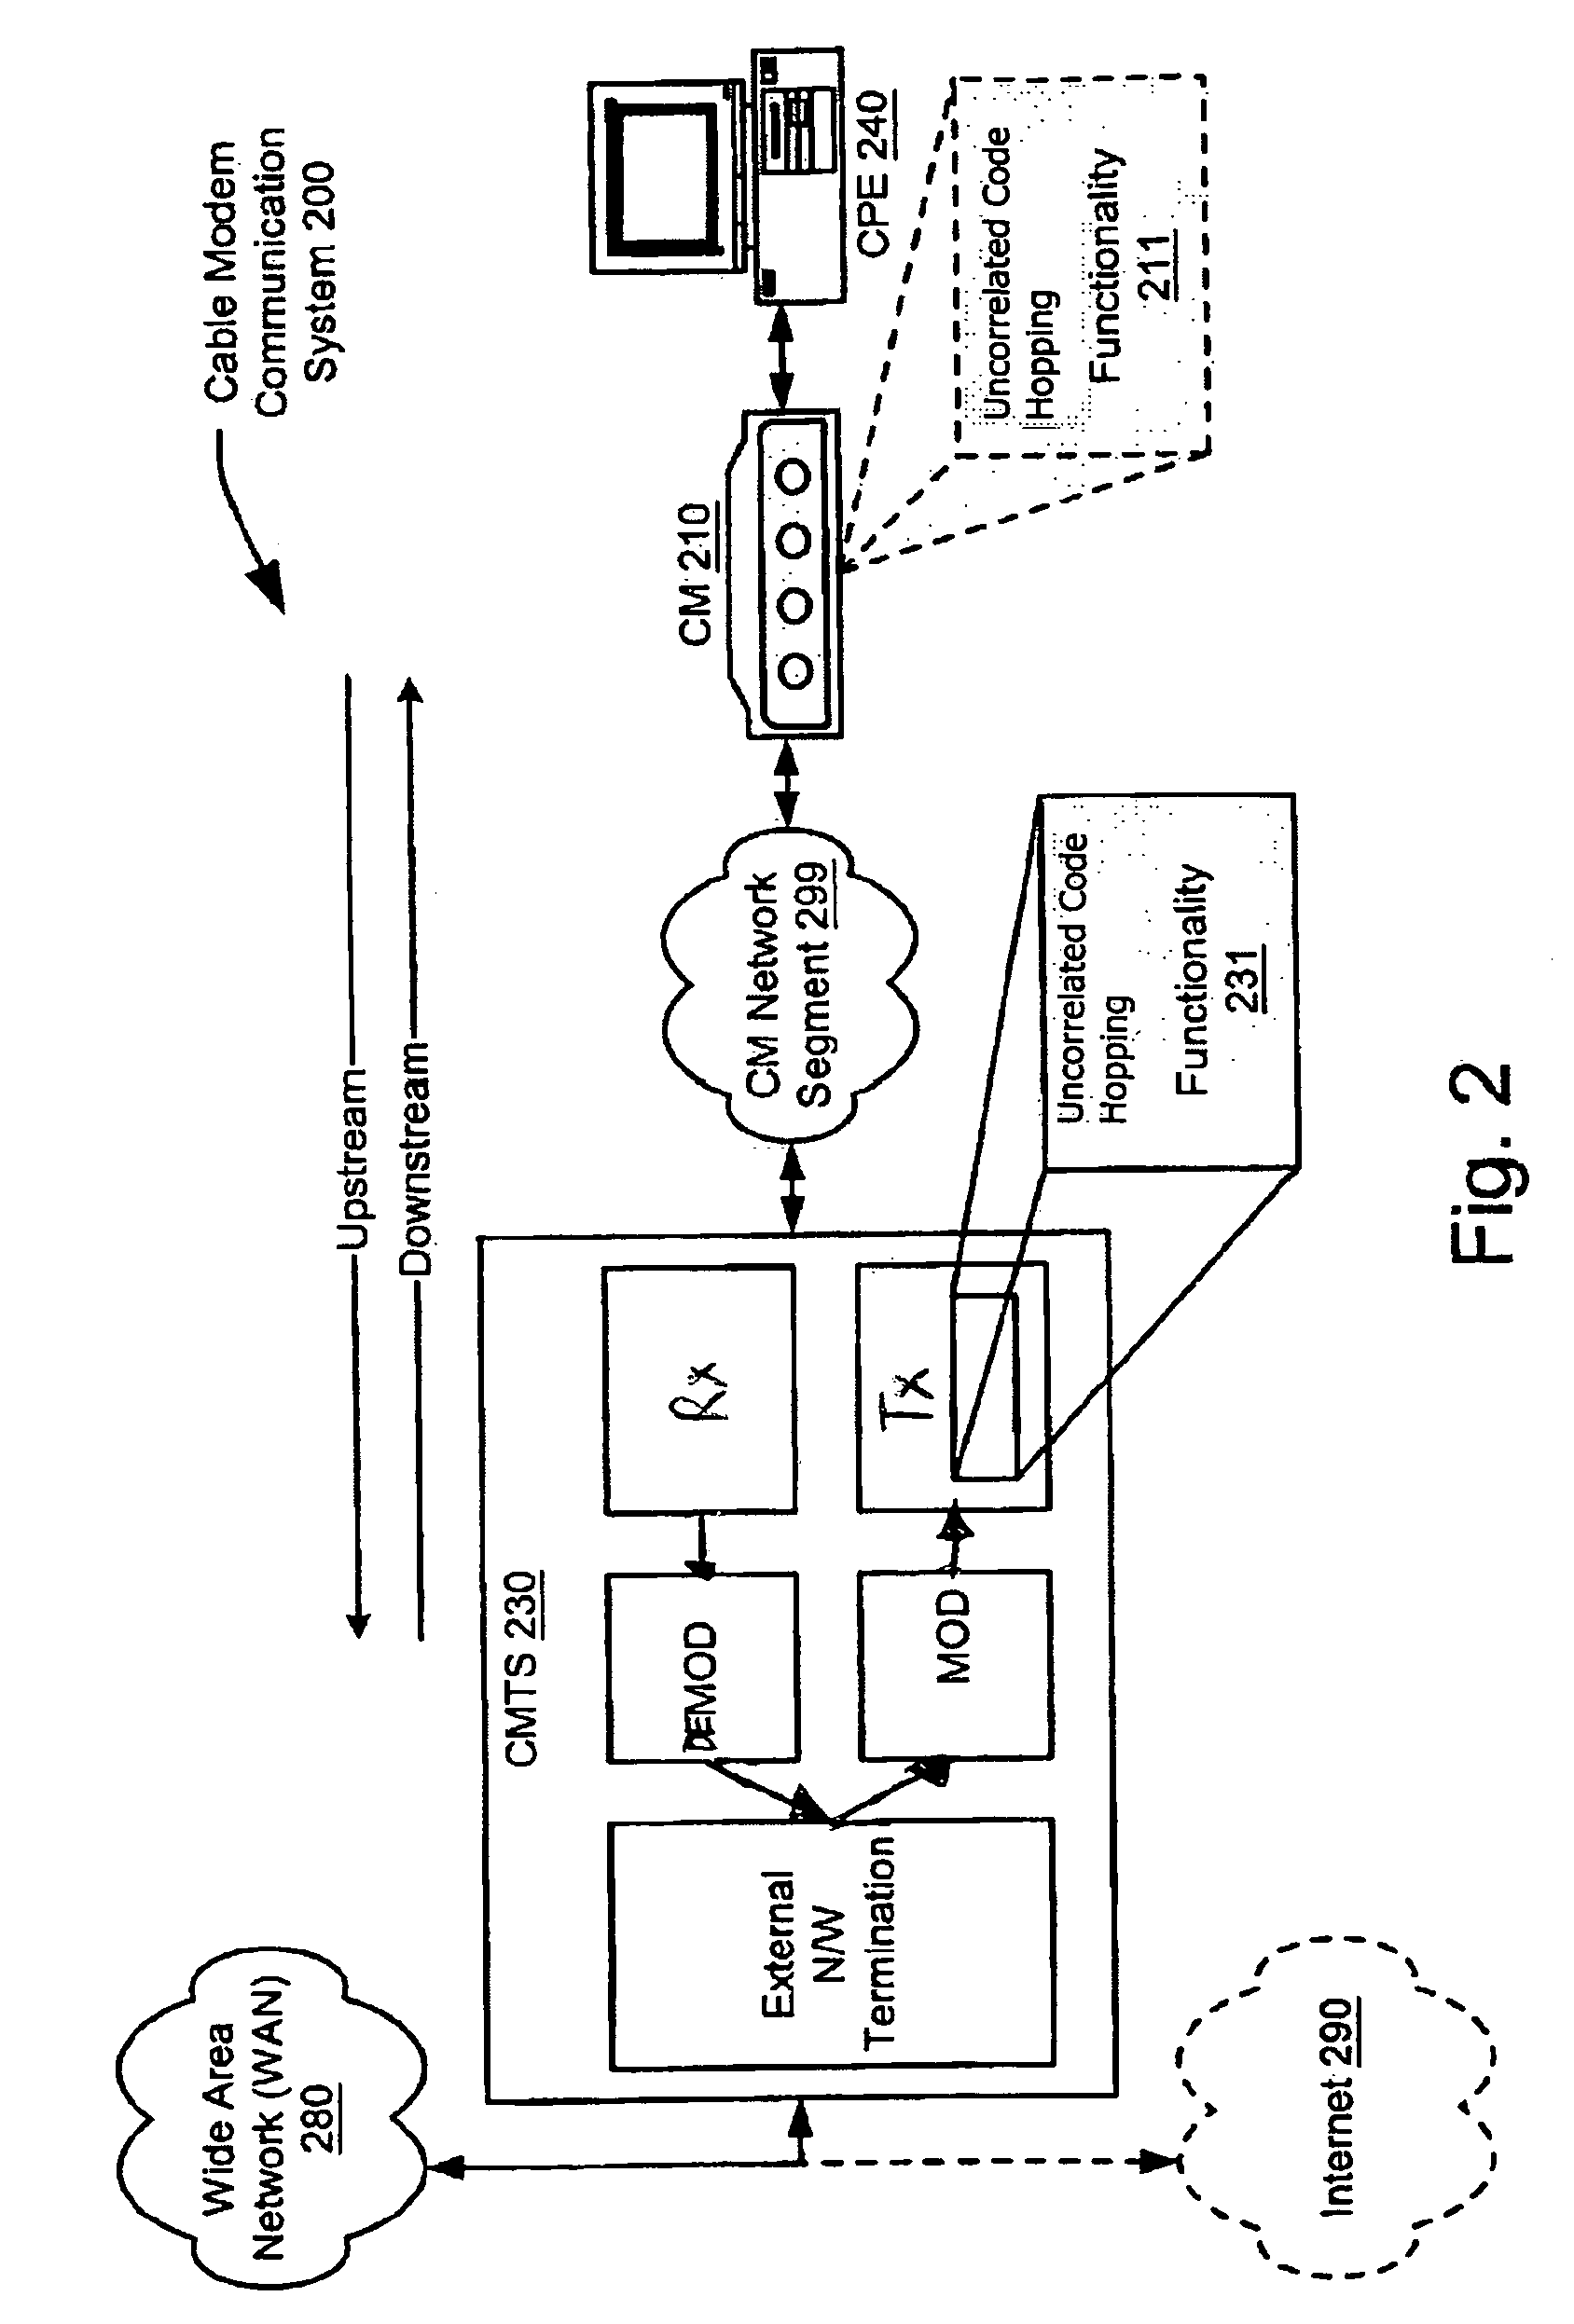 System and method of uncorrelated code hopping in a communications system